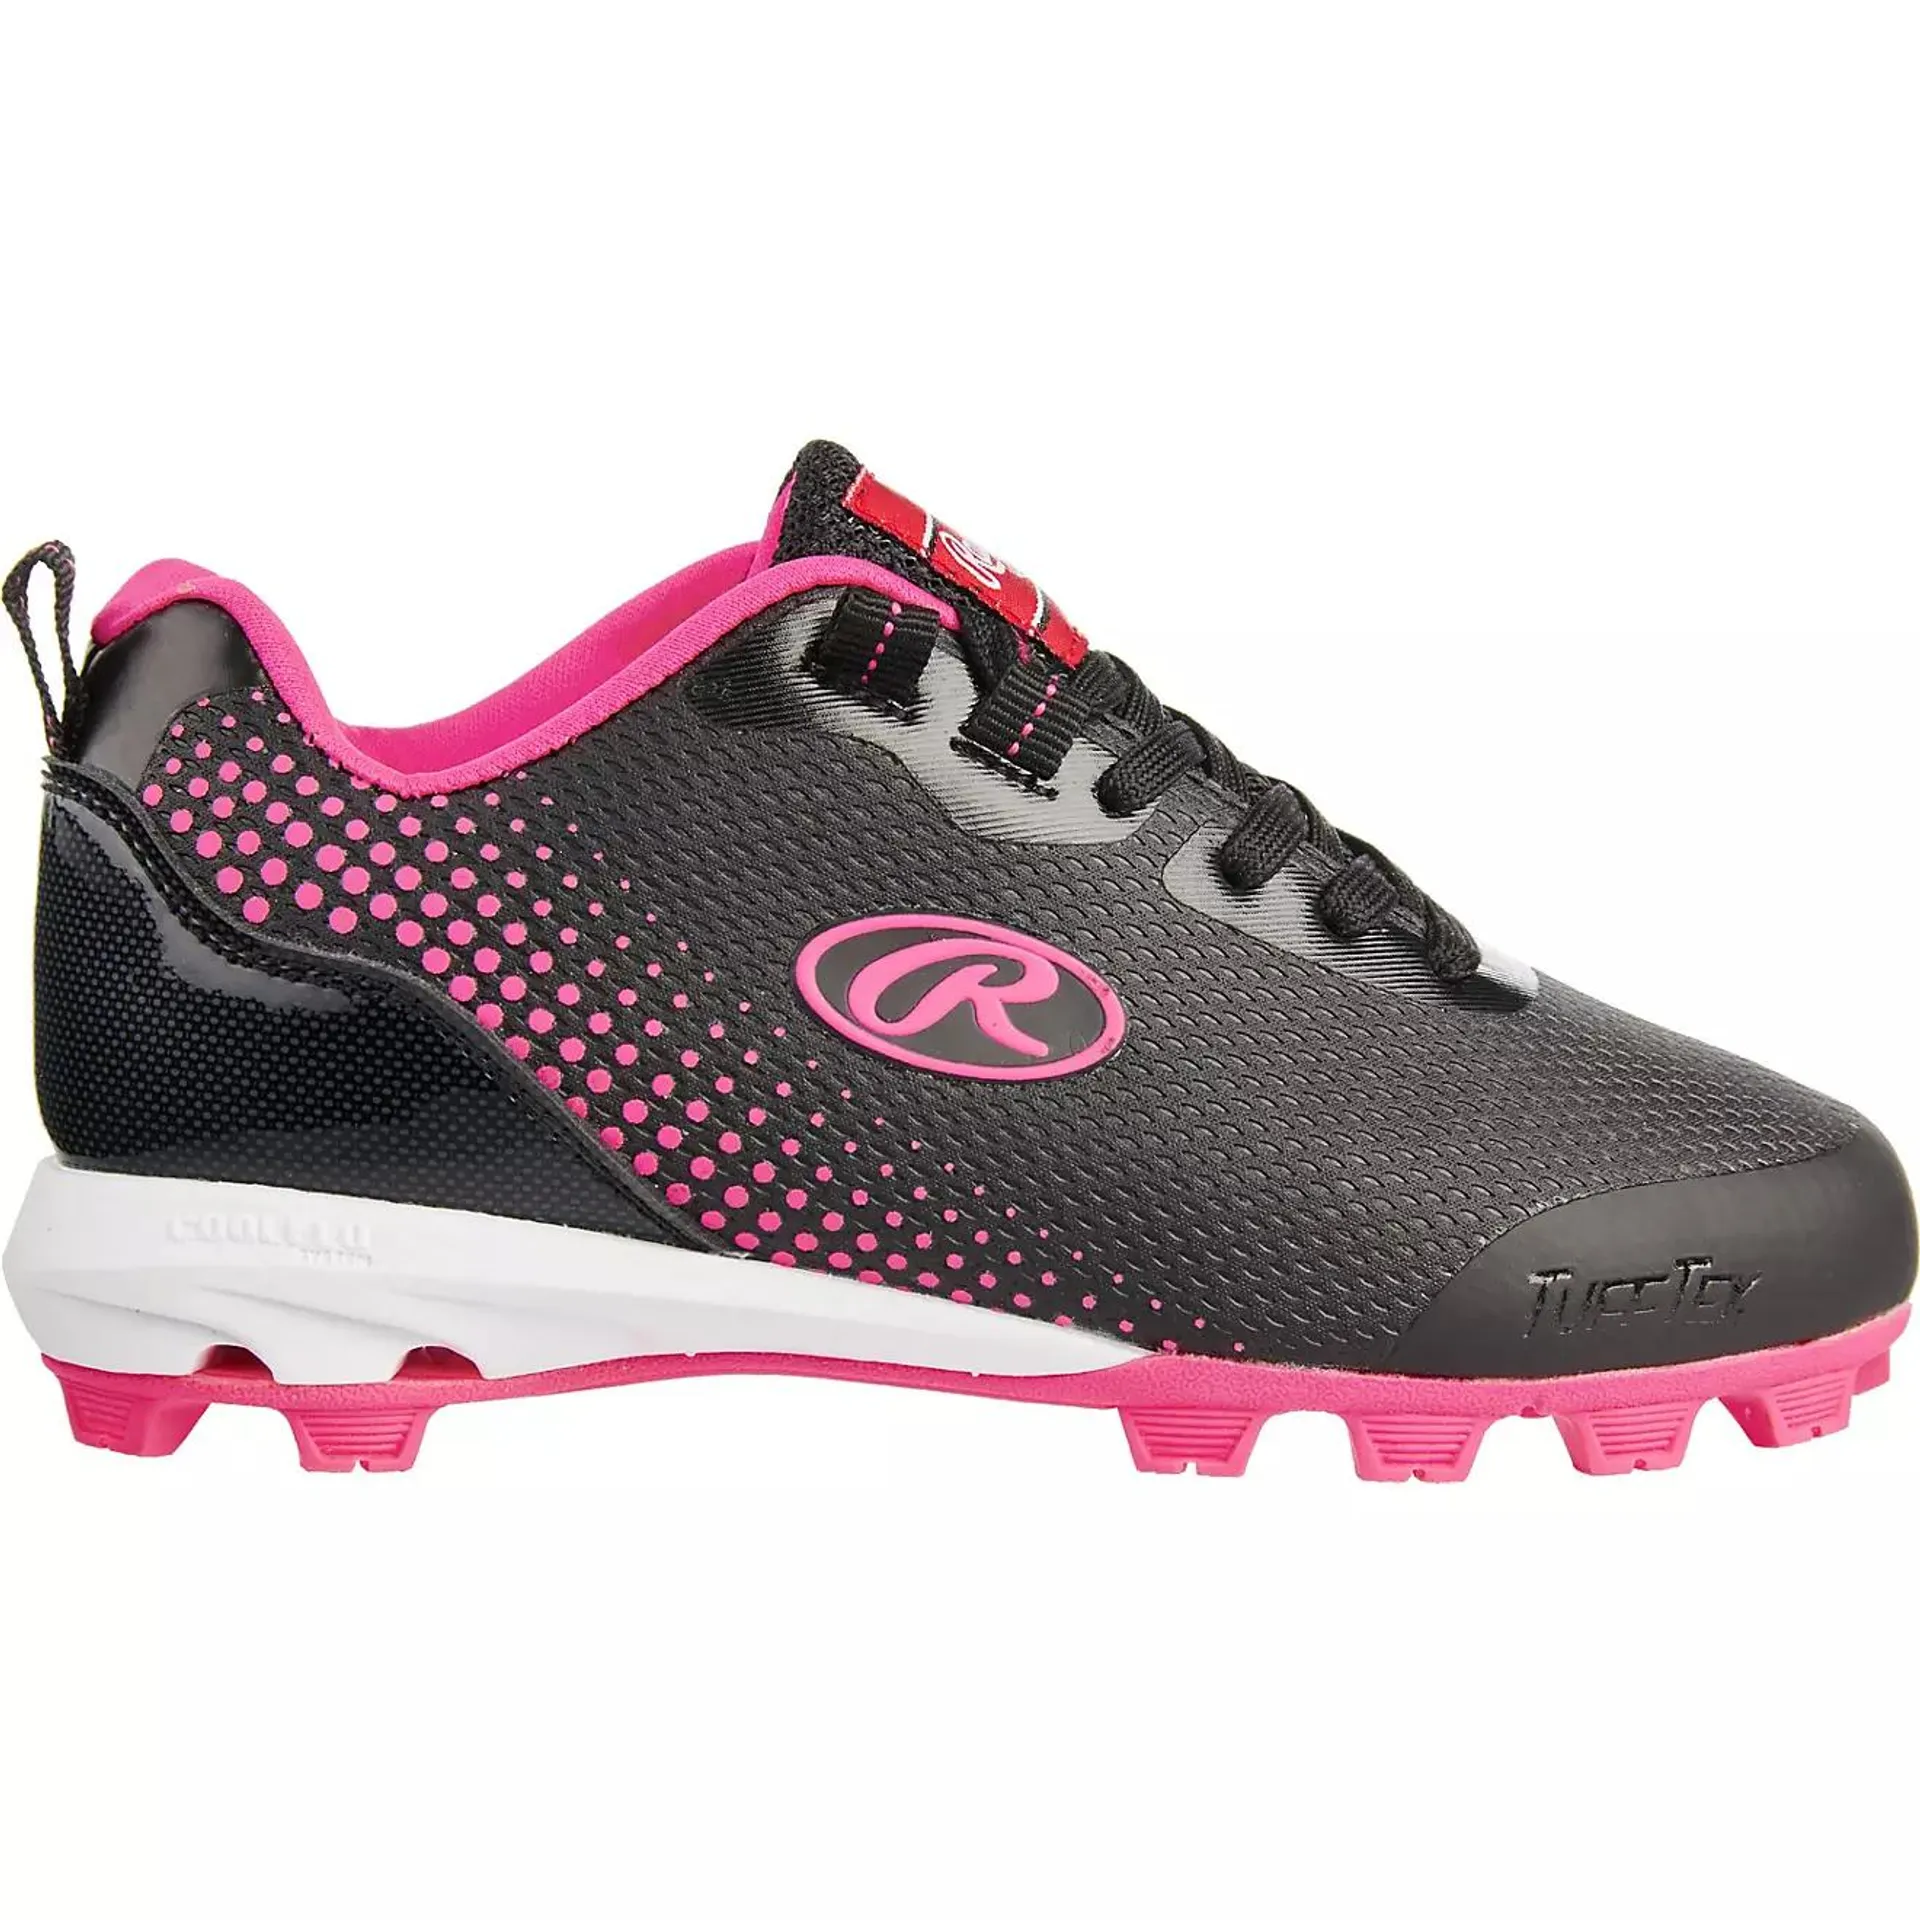 Rawlings Girls’ Division Low Softball Cleats